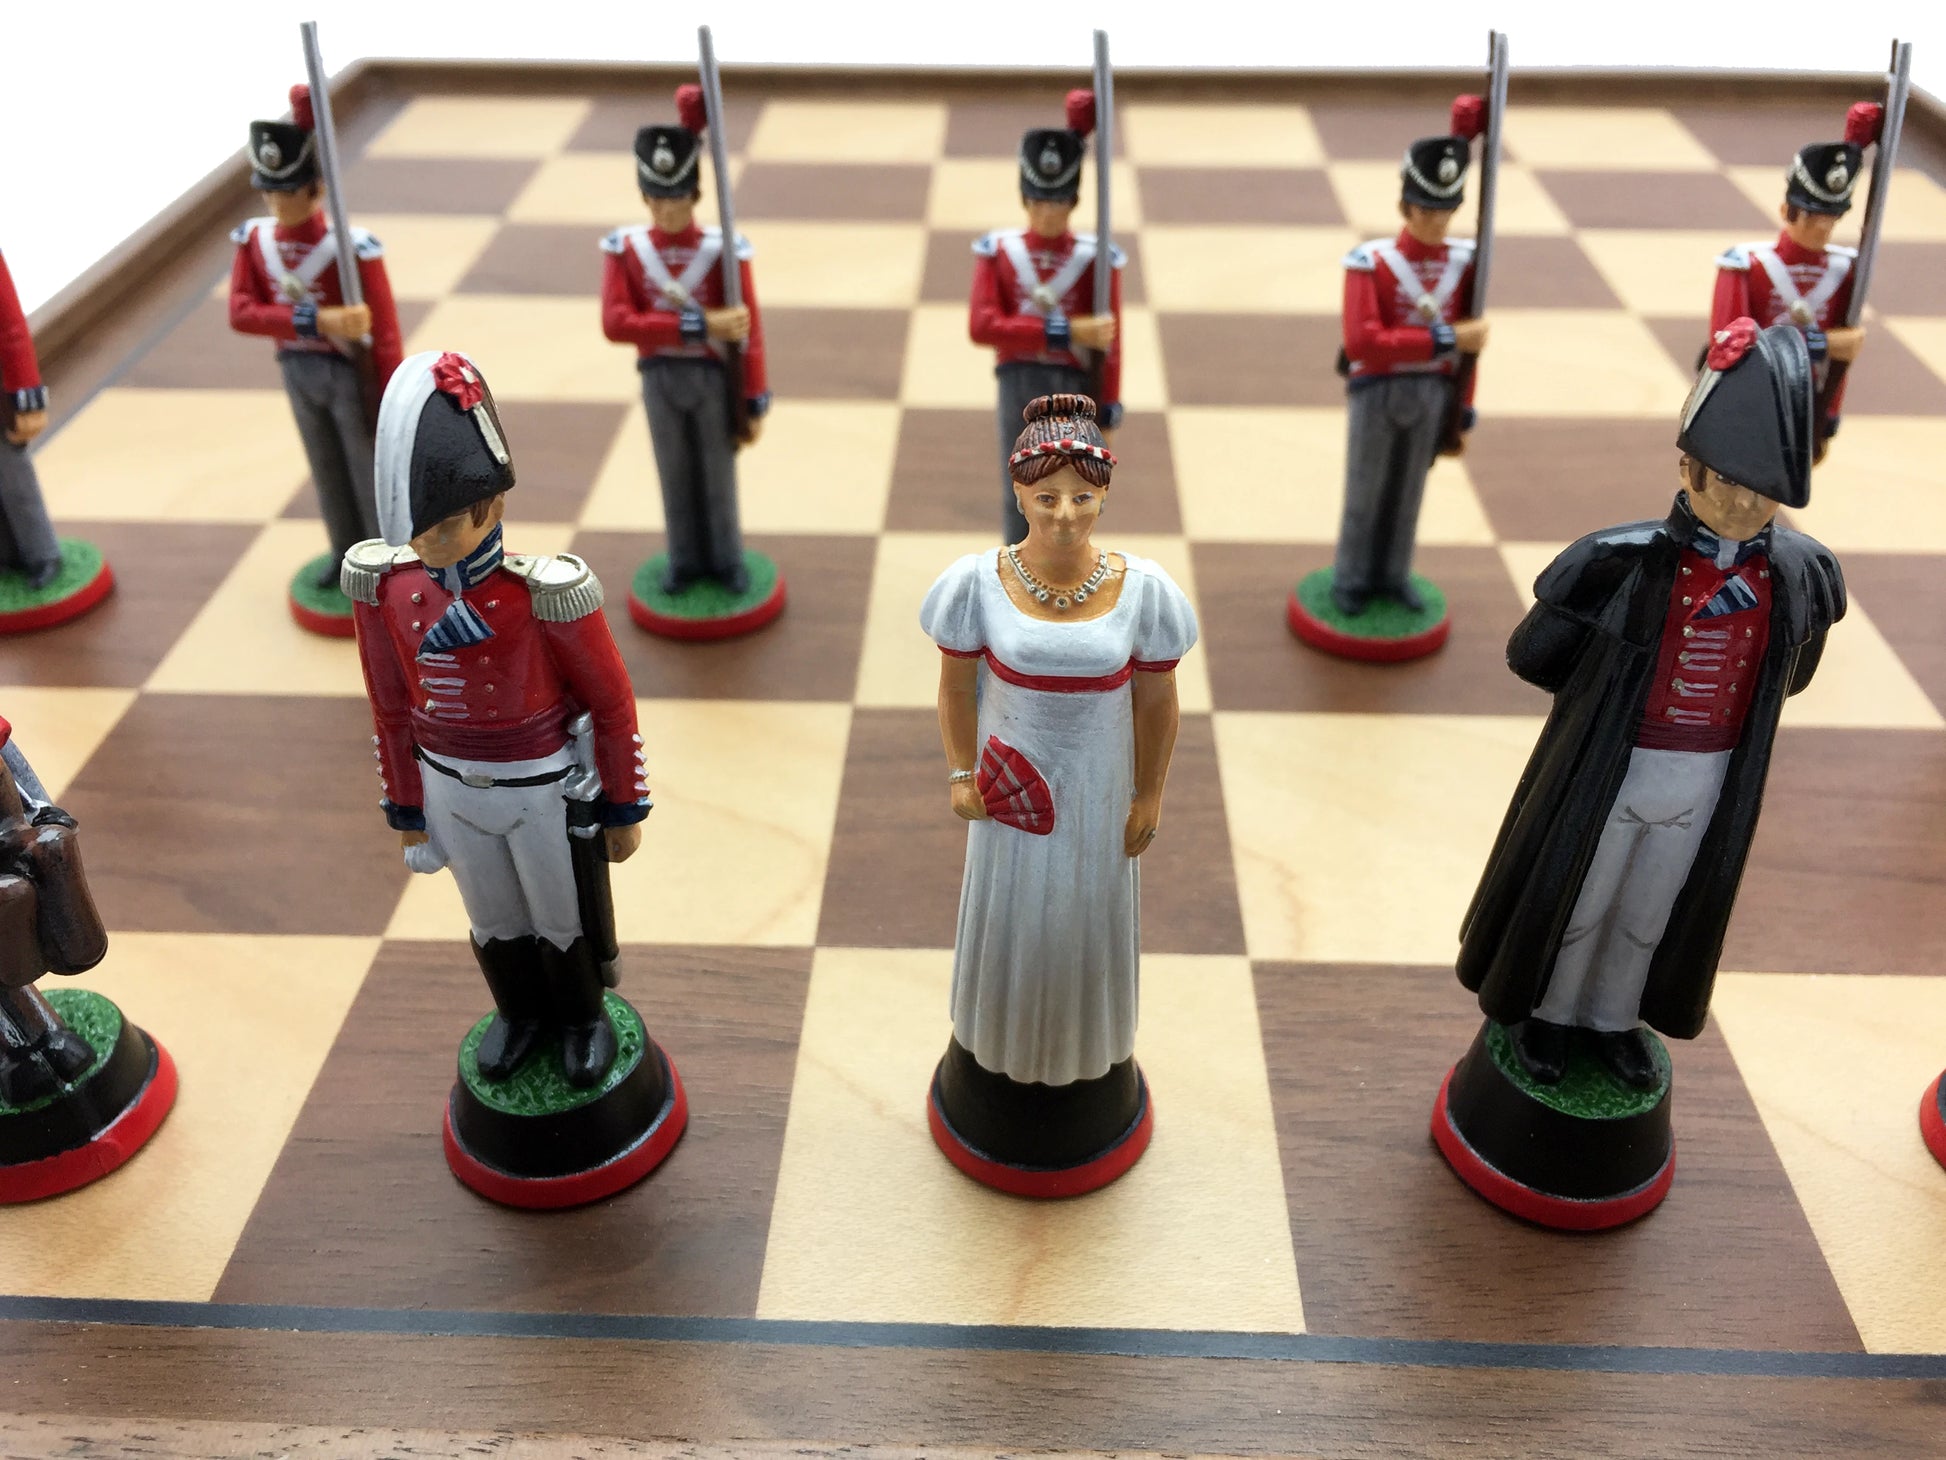 Toy soldier chess set Battle of Waterloo. Hand painted. Queen and king.